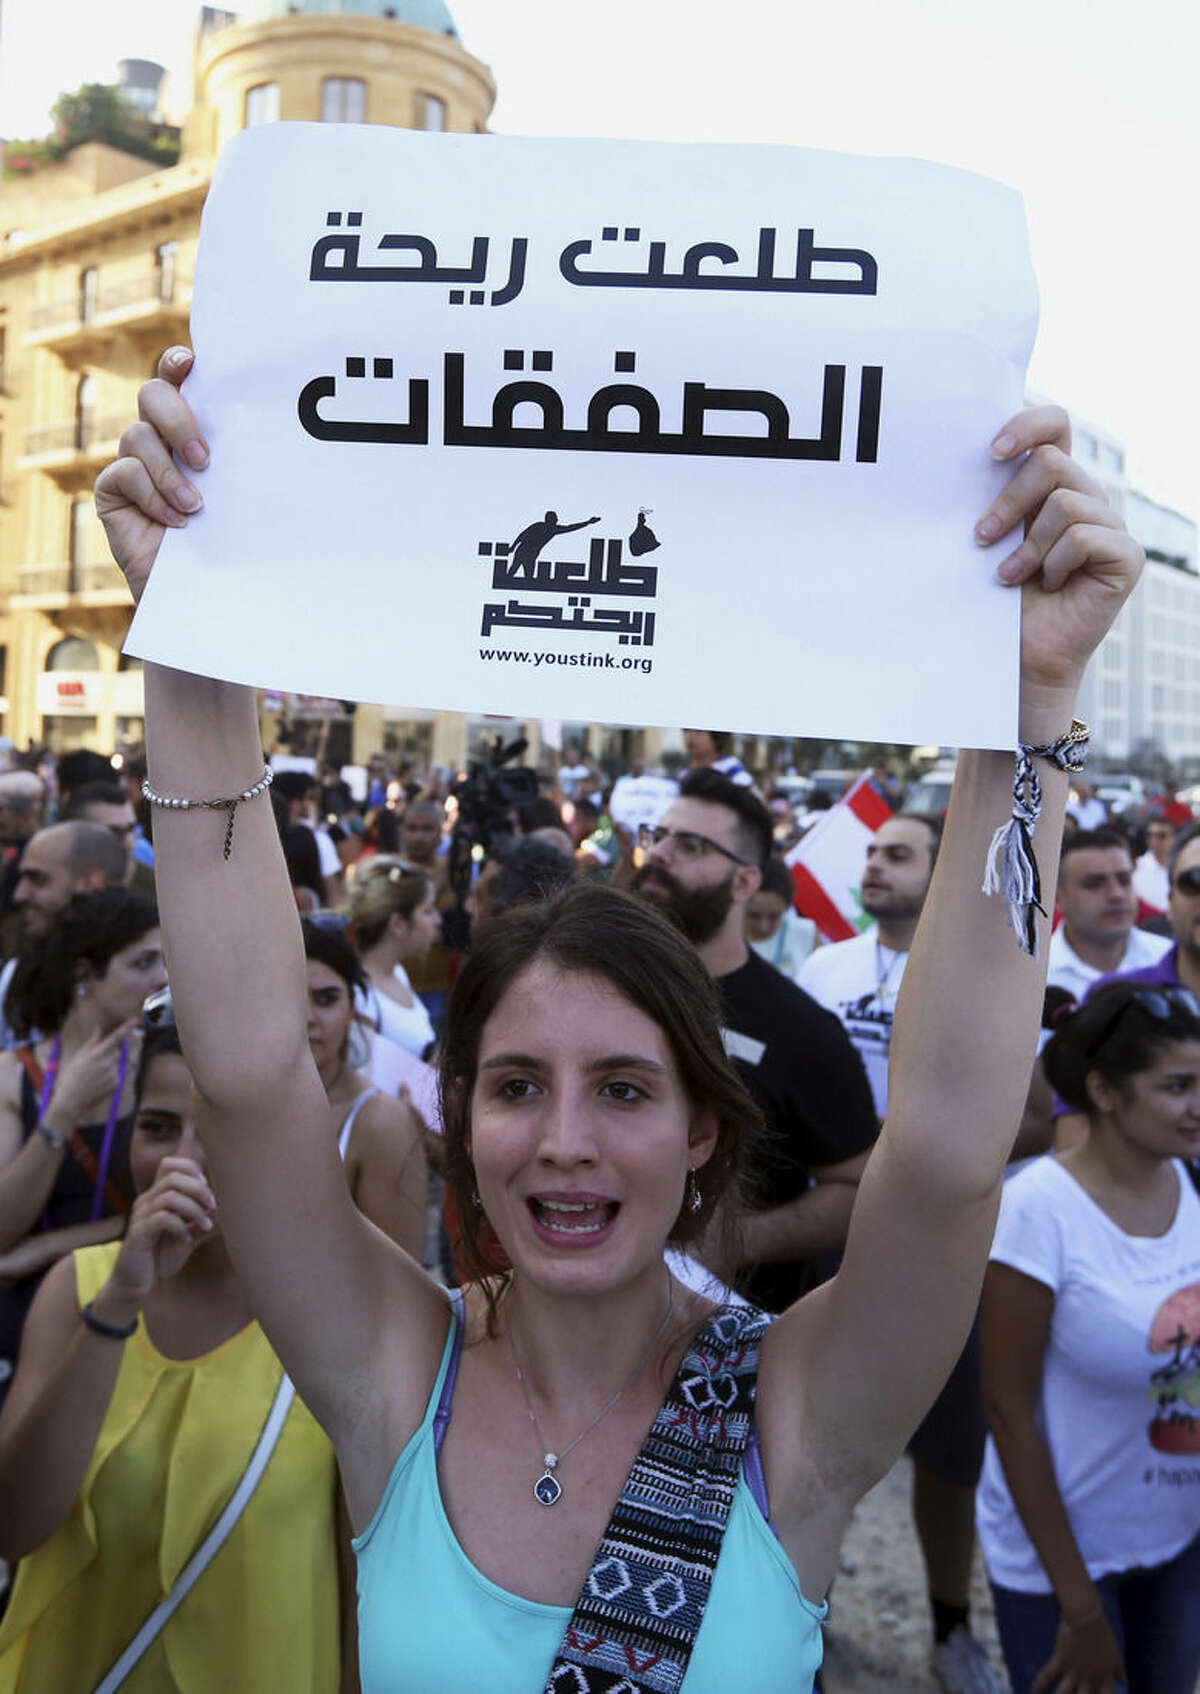 FILE - In this Saturday, Aug. 8, 2015 file photo, a Lebanese protester chants slogans against the Lebanese government during a demonstration against the ongoing trash crisis, at the Martyrs square in downtown Beirut, Lebanon. Starting out as a small group of tech-savvy young activists who organized to protest the garbage that for weeks has been piling up on Beirut’s streets, Lebanon's "You Stink" movement has now grown into a popular uprising that seeks to nip at the power base of an entire political class. Sign in Arabic reads 'The deals stink'. (AP Photo/Bilal Hussein, File)